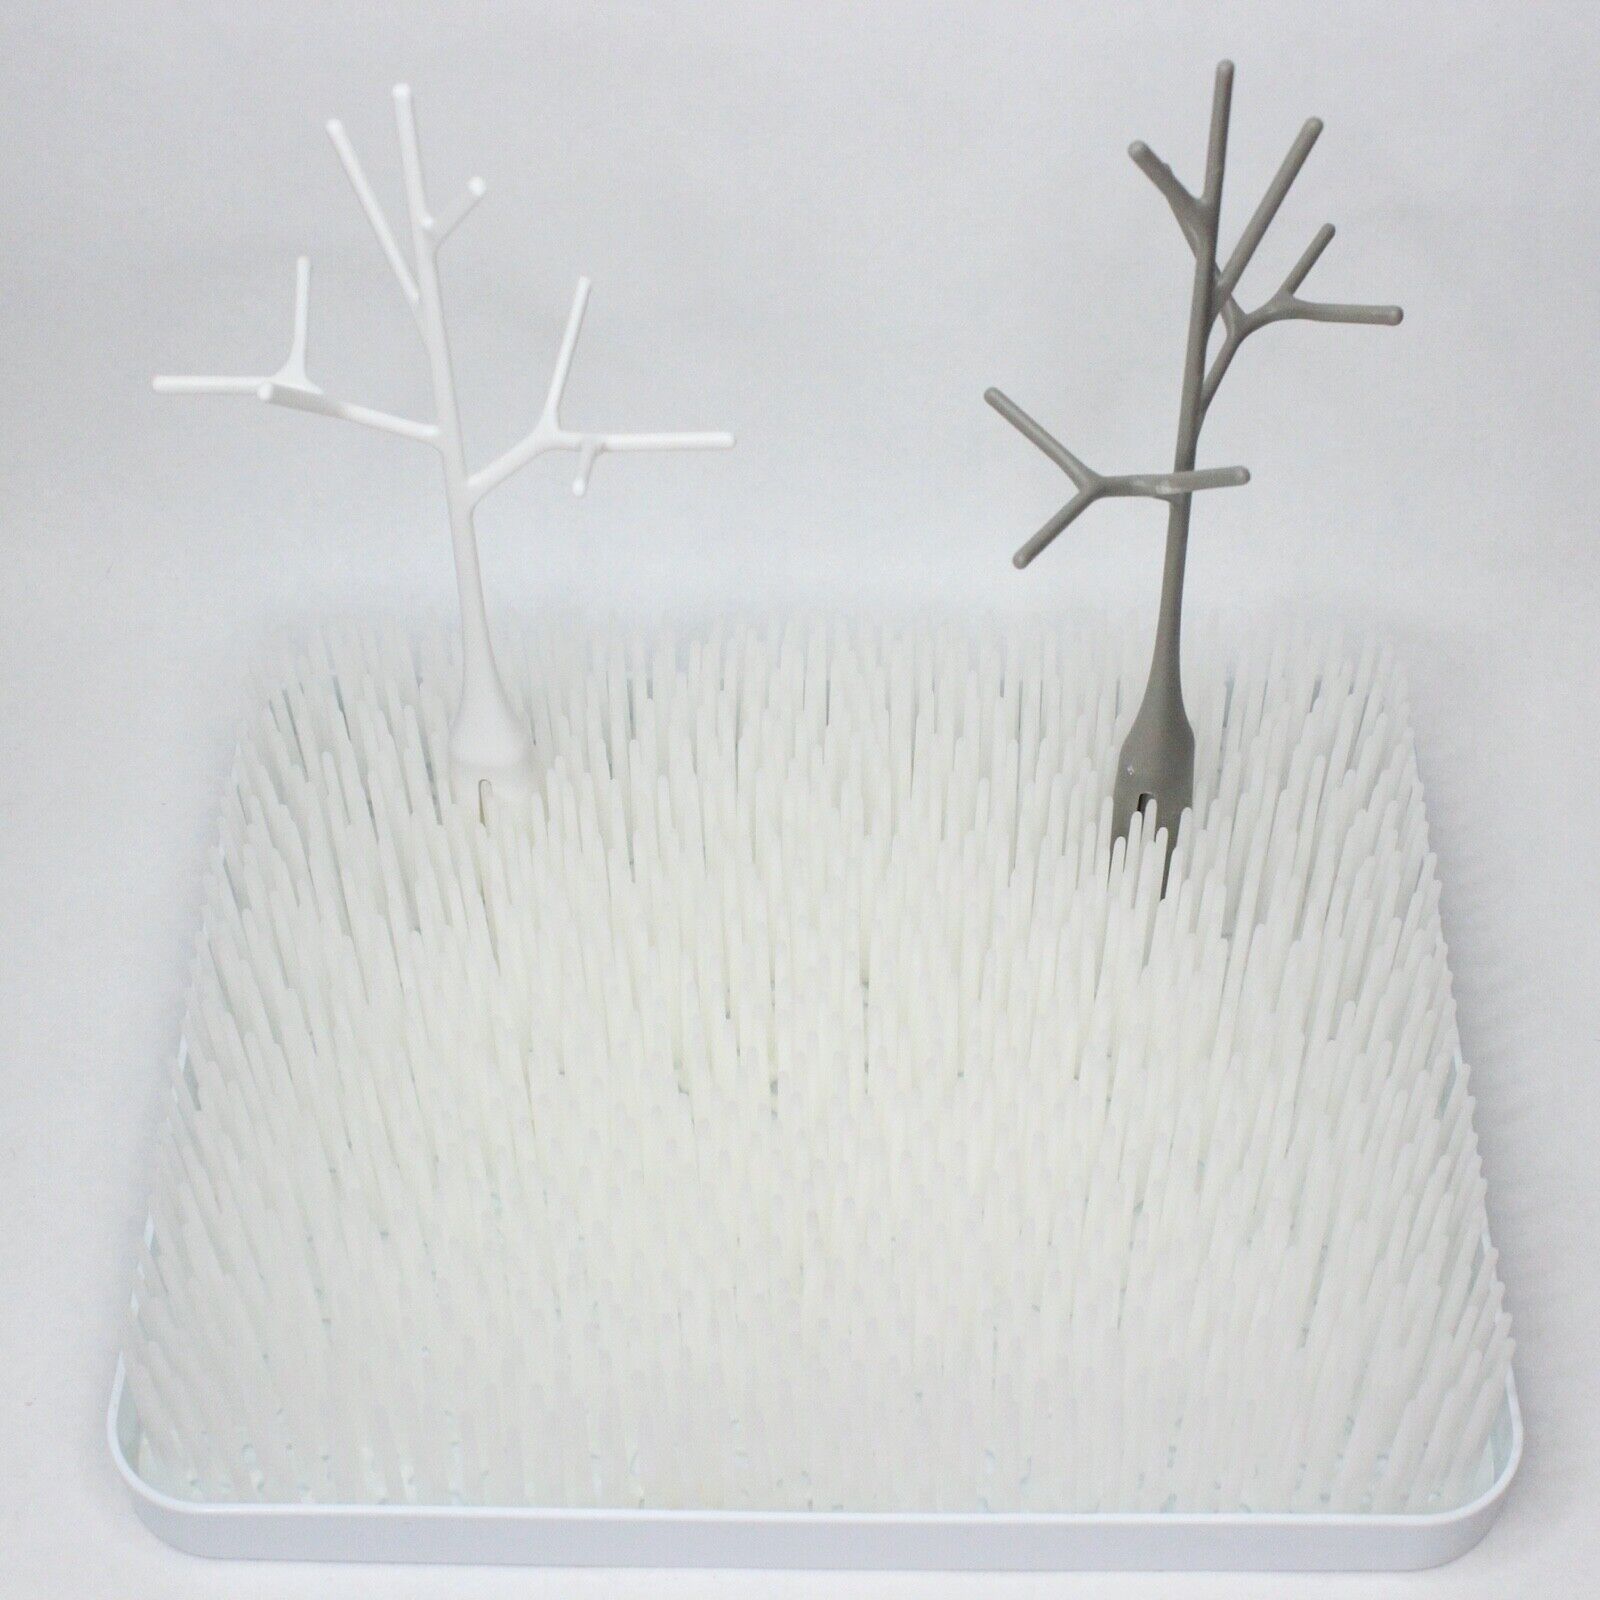 Boon Lawn Countertop Bottle Accessories Drying Rack with 2 Twigs White Gray